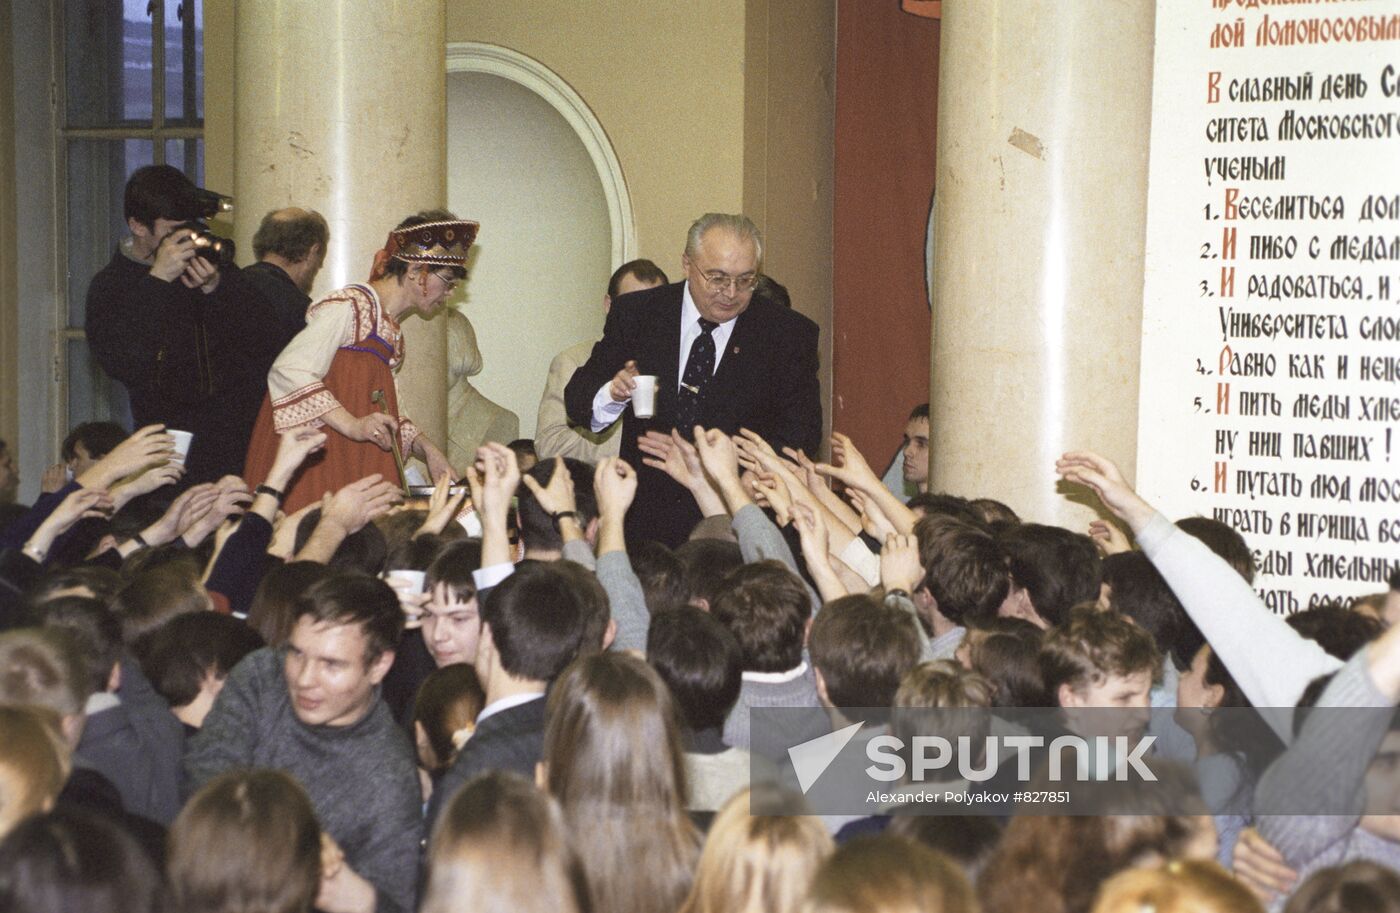 Students celebrate Tatyana Day in the Moscow State University